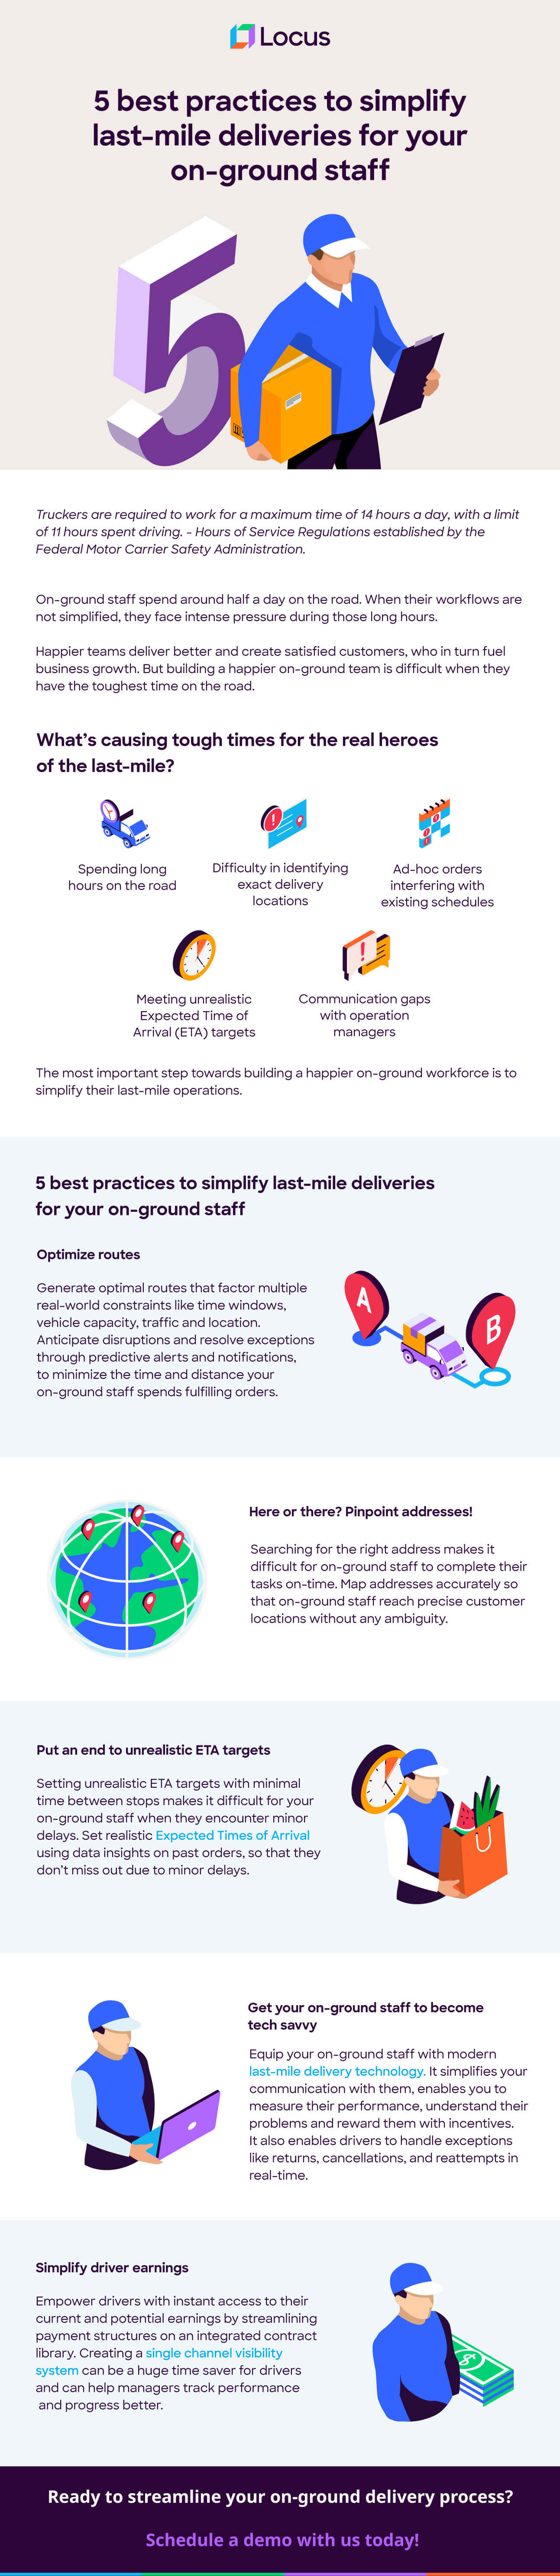 5 best practices to simplify last-mile deliveries for your on-ground staff